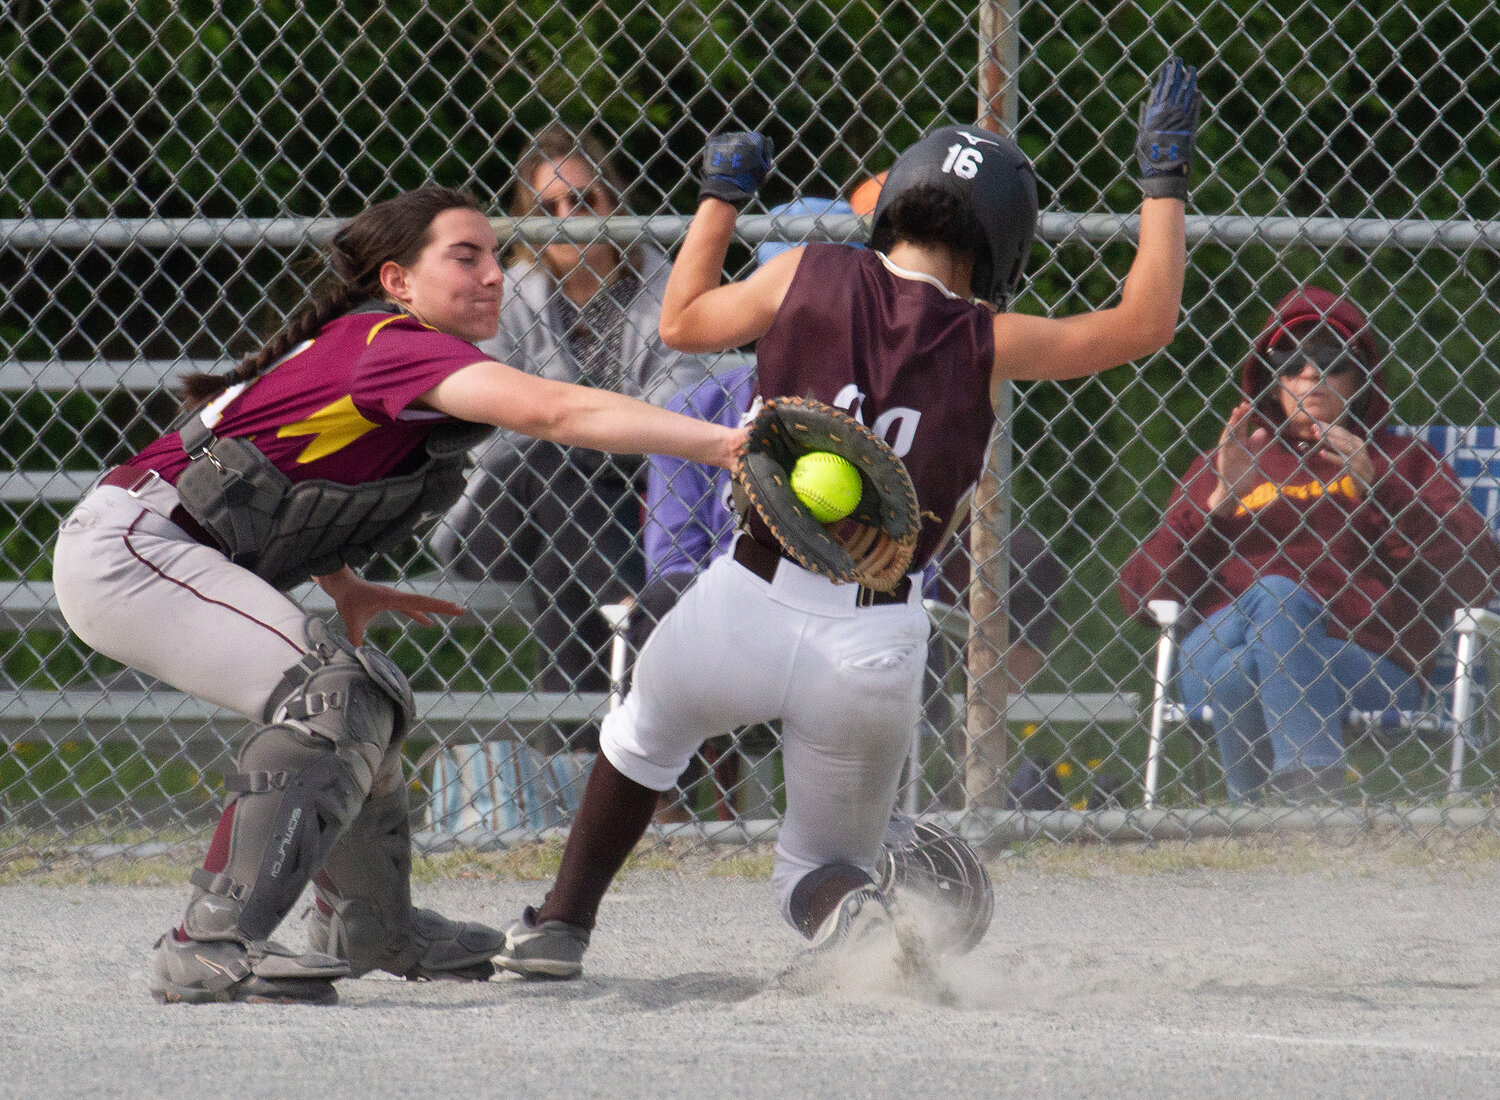 Tess Silvia is called out on a force out at home plate to end the third inning.